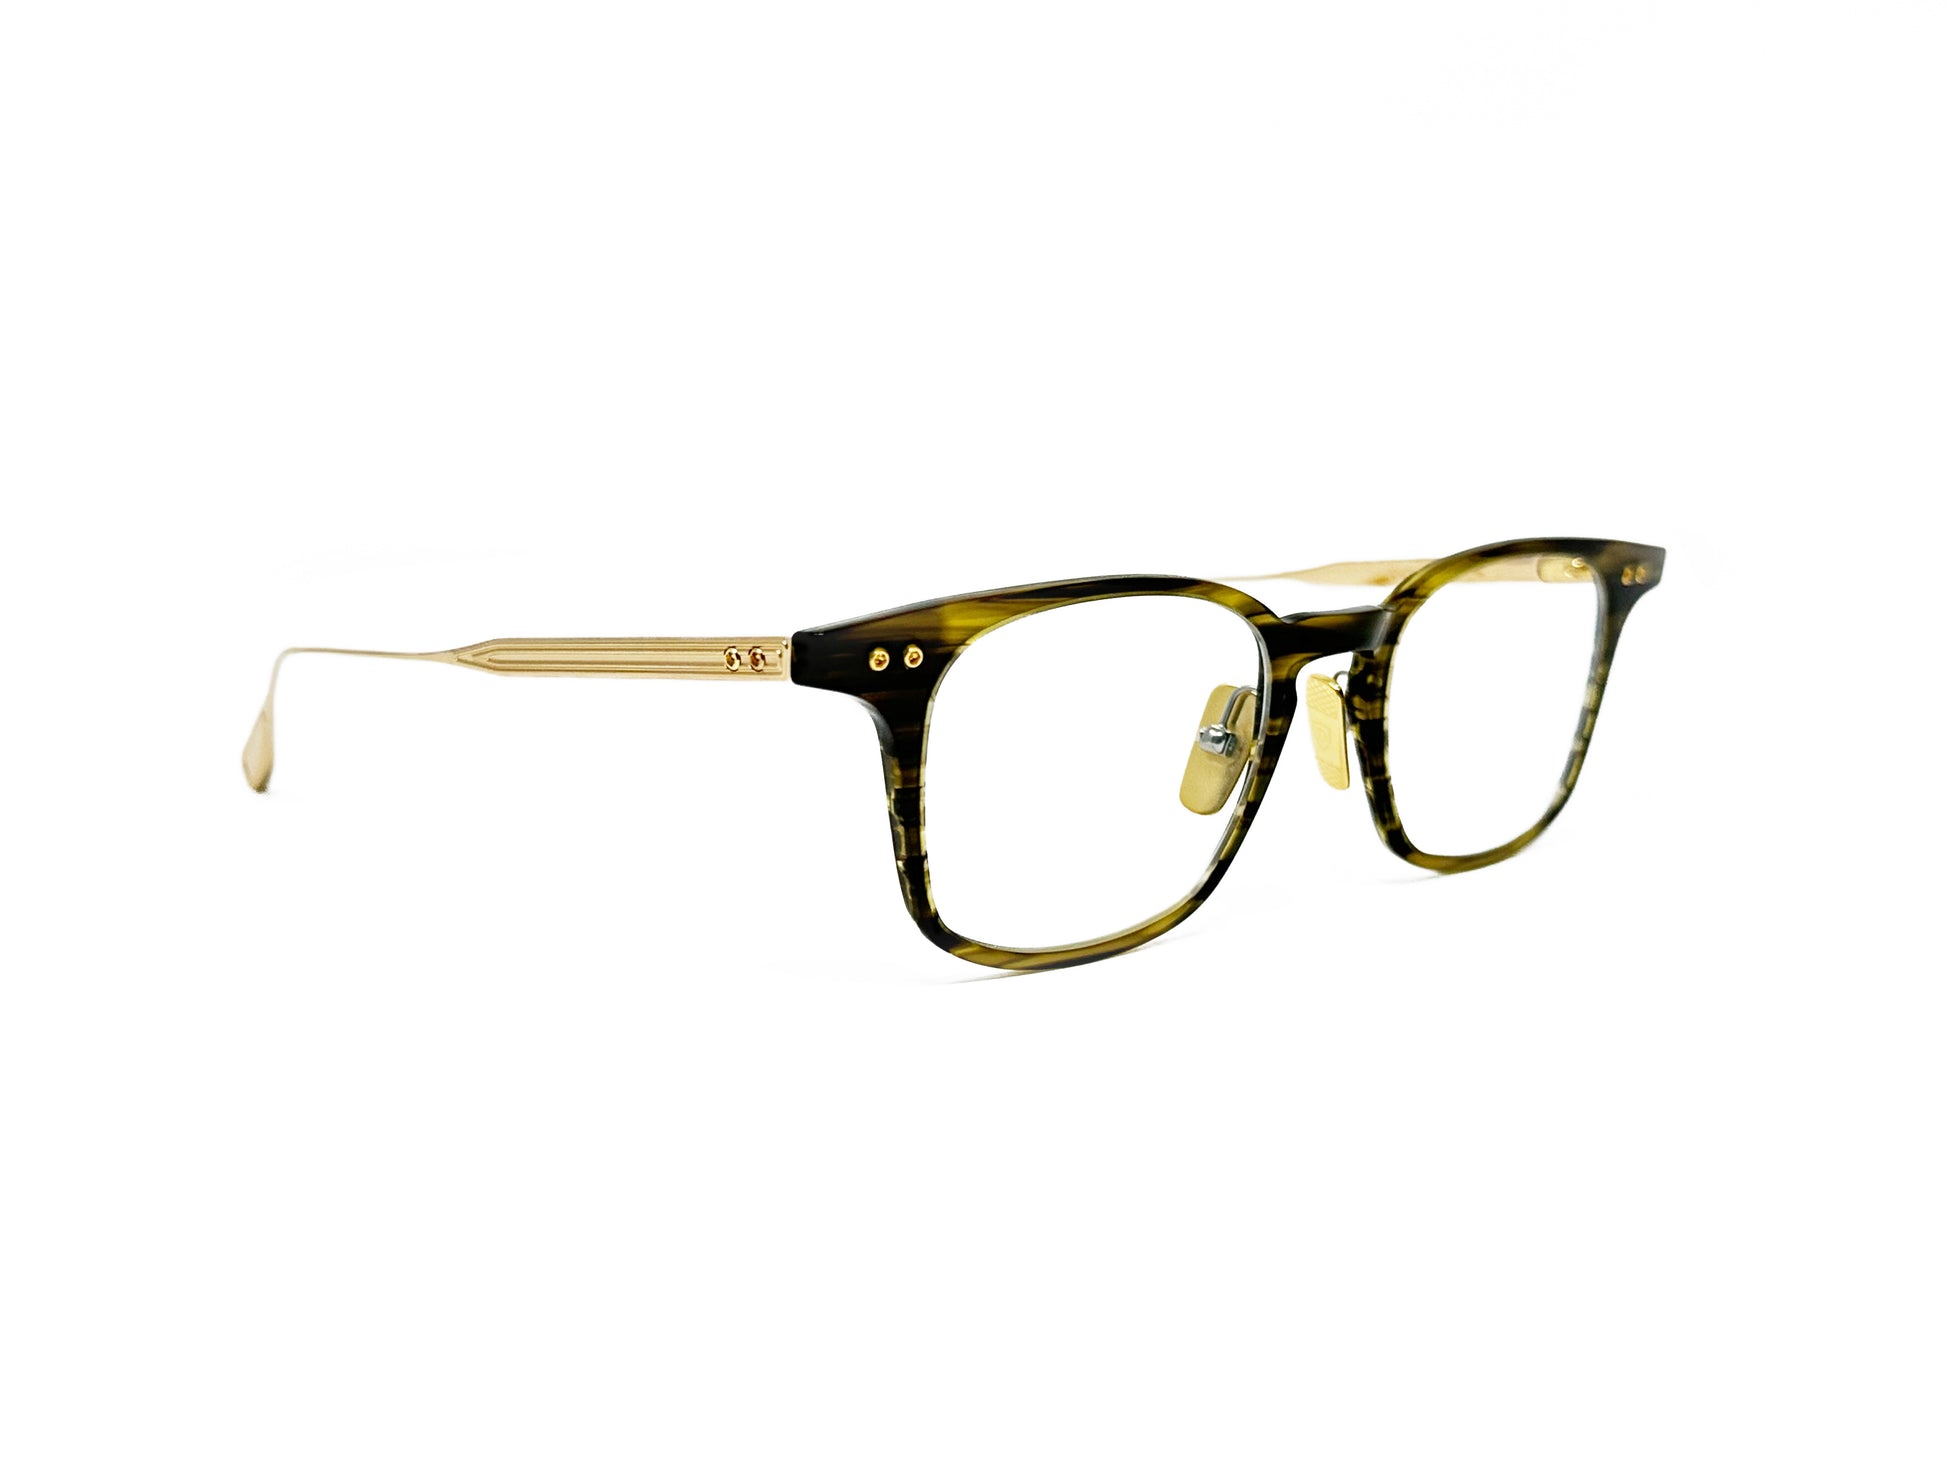 Dita square, acetate, optical frame with gold metal temples. Model: Buckeye. Color: 02 - Timber Brown, light yellow-based brown wood pattern. Side view.